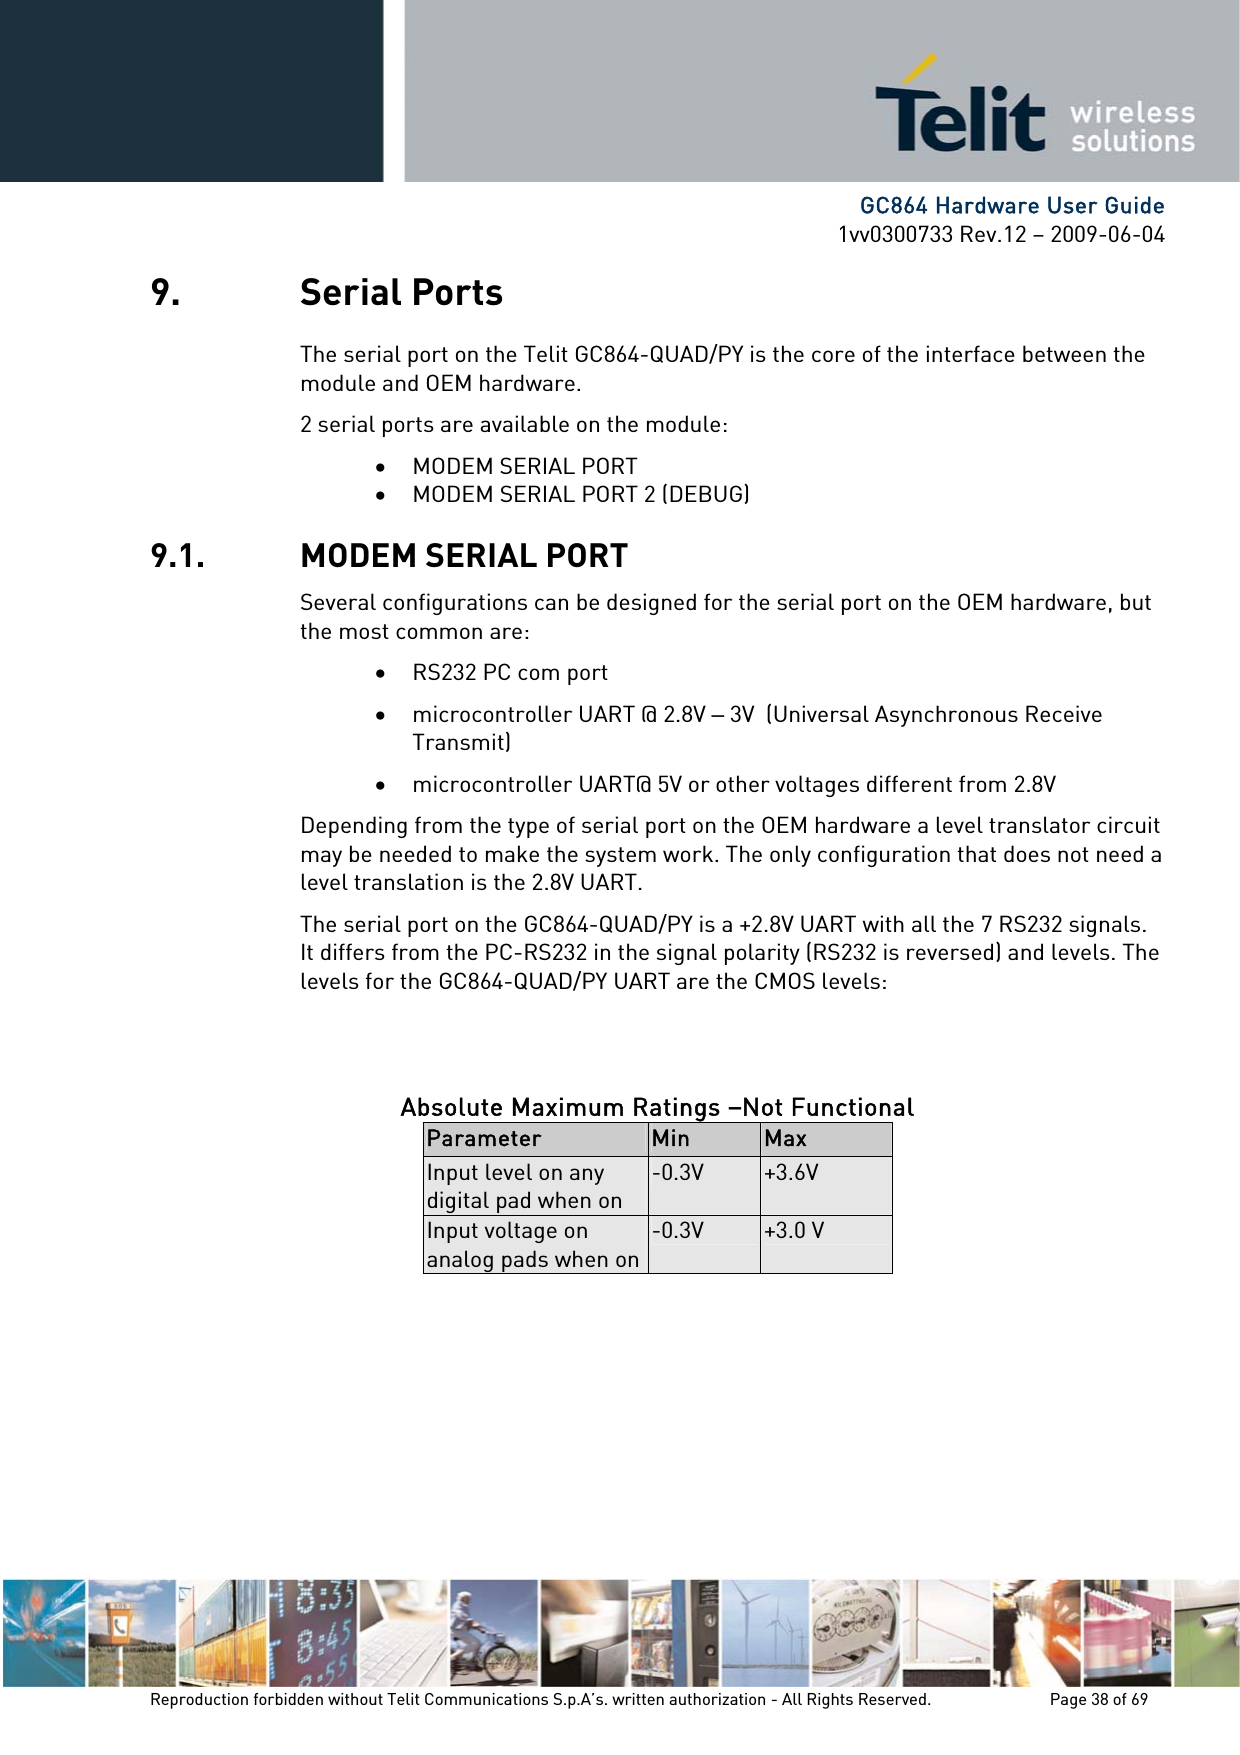      GC864 Hardware User Guide 1vv0300733 Rev.12 – 2009-06-04 9. Serial Ports The serial port on the Telit GC864-QUAD/PY is the core of the interface between the module and OEM hardware.  2 serial ports are available on the module: • MODEM SERIAL PORT • MODEM SERIAL PORT 2 (DEBUG) 9.1. MODEM SERIAL PORT Several configurations can be designed for the serial port on the OEM hardware, but the most common are: • RS232 PC com port • microcontroller UART @ 2.8V – 3V  (Universal Asynchronous Receive Transmit)  • microcontroller UART@ 5V or other voltages different from 2.8V  Depending from the type of serial port on the OEM hardware a level translator circuit may be needed to make the system work. The only configuration that does not need a level translation is the 2.8V UART. The serial port on the GC864-QUAD/PY is a +2.8V UART with all the 7 RS232 signals. It differs from the PC-RS232 in the signal polarity (RS232 is reversed) and levels. The levels for the GC864-QUAD/PY UART are the CMOS levels:   Absolute Maximum Ratings –Not Functional Parameter  Min  Max Input level on any digital pad when on -0.3V  +3.6V Input voltage on analog pads when on-0.3V  +3.0 V          Reproduction forbidden without Telit Communications S.p.A’s. written authorization - All Rights Reserved.    Page 38 of 69  